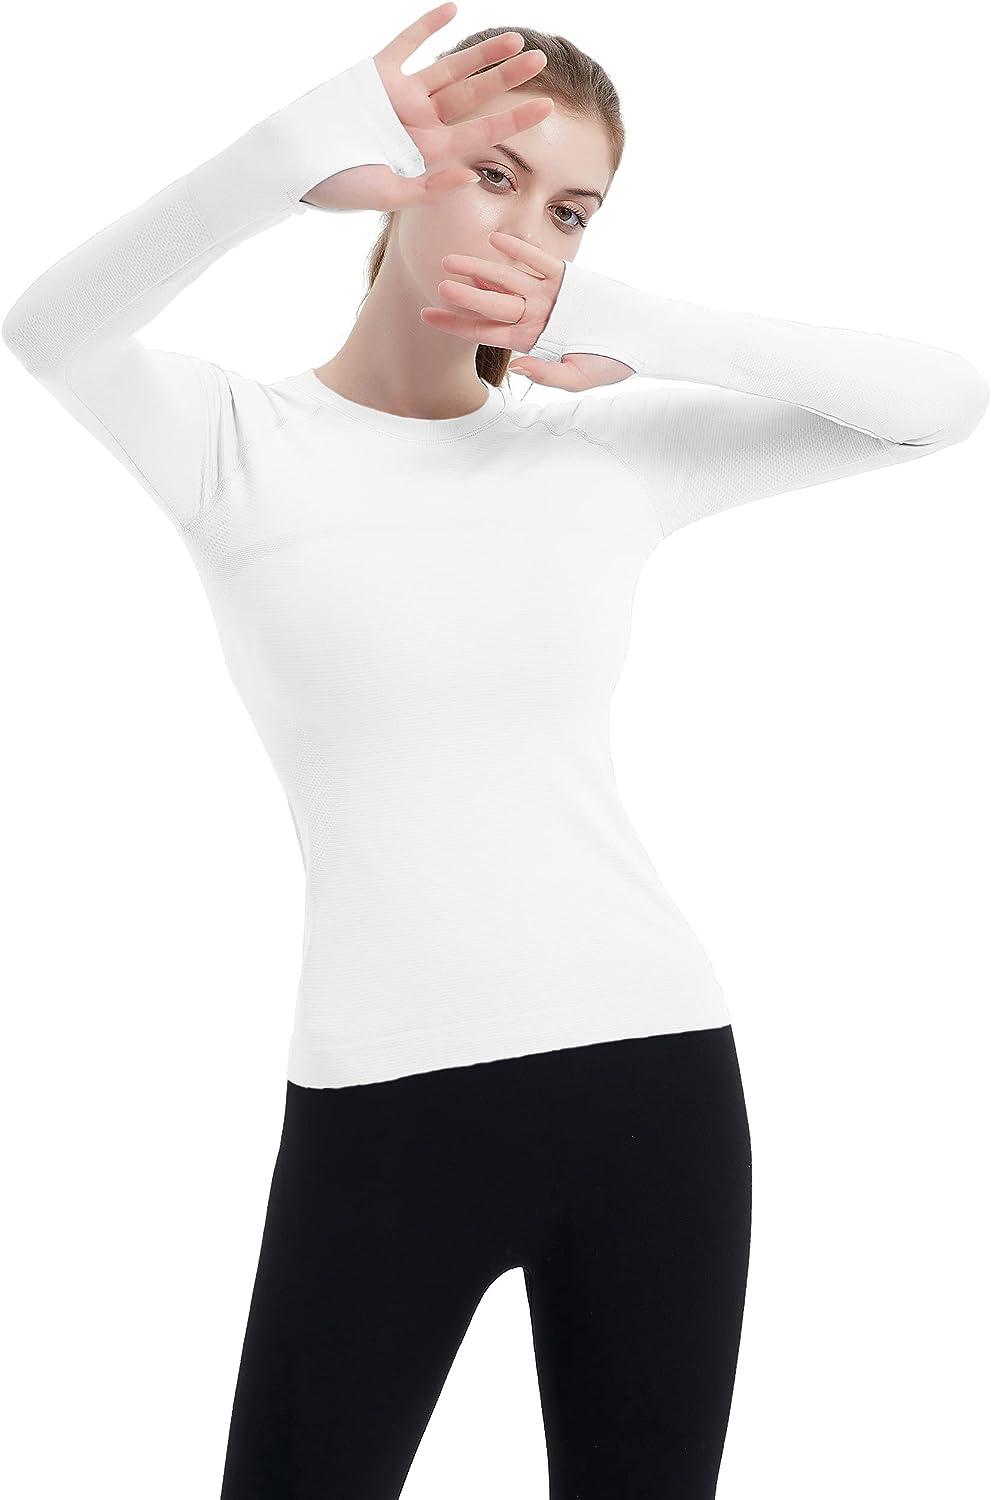 Best Deal for MathCat Long Sleeve Workout Shirts for Women Breathable